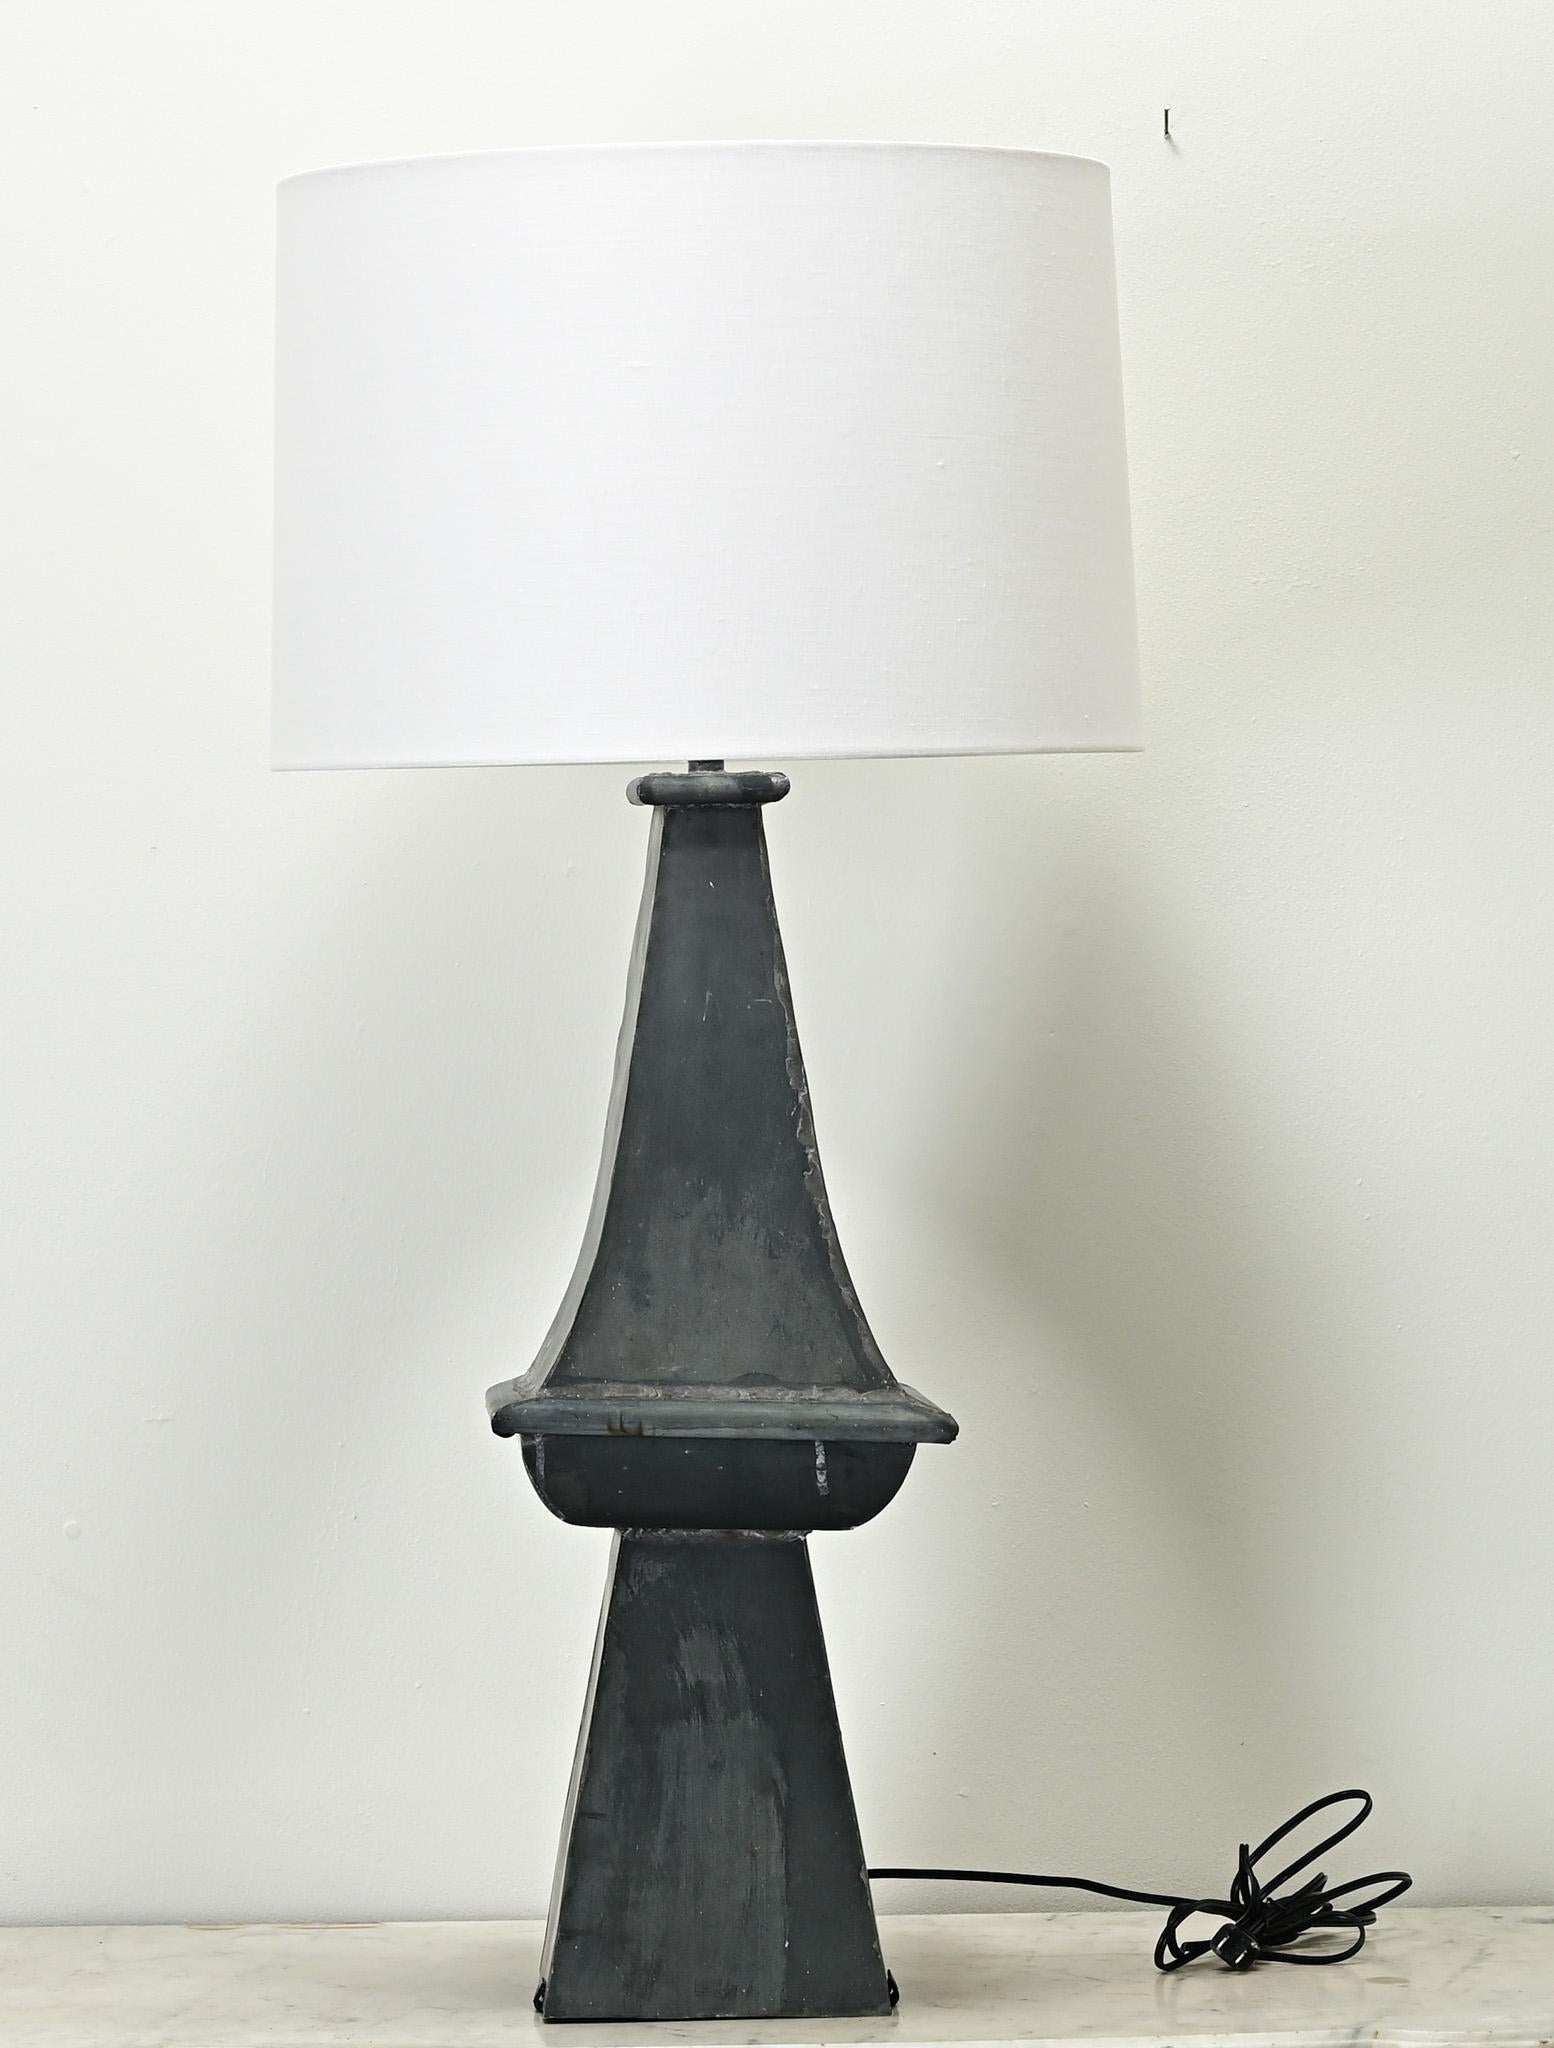 A tall vintage zinc table lamp made in France with a new linen shade. Once an architectural element, this lamp is made from a rooftop finial and has a beautiful patina consistent with use. Professionally wired for the US using UL listed parts. Be